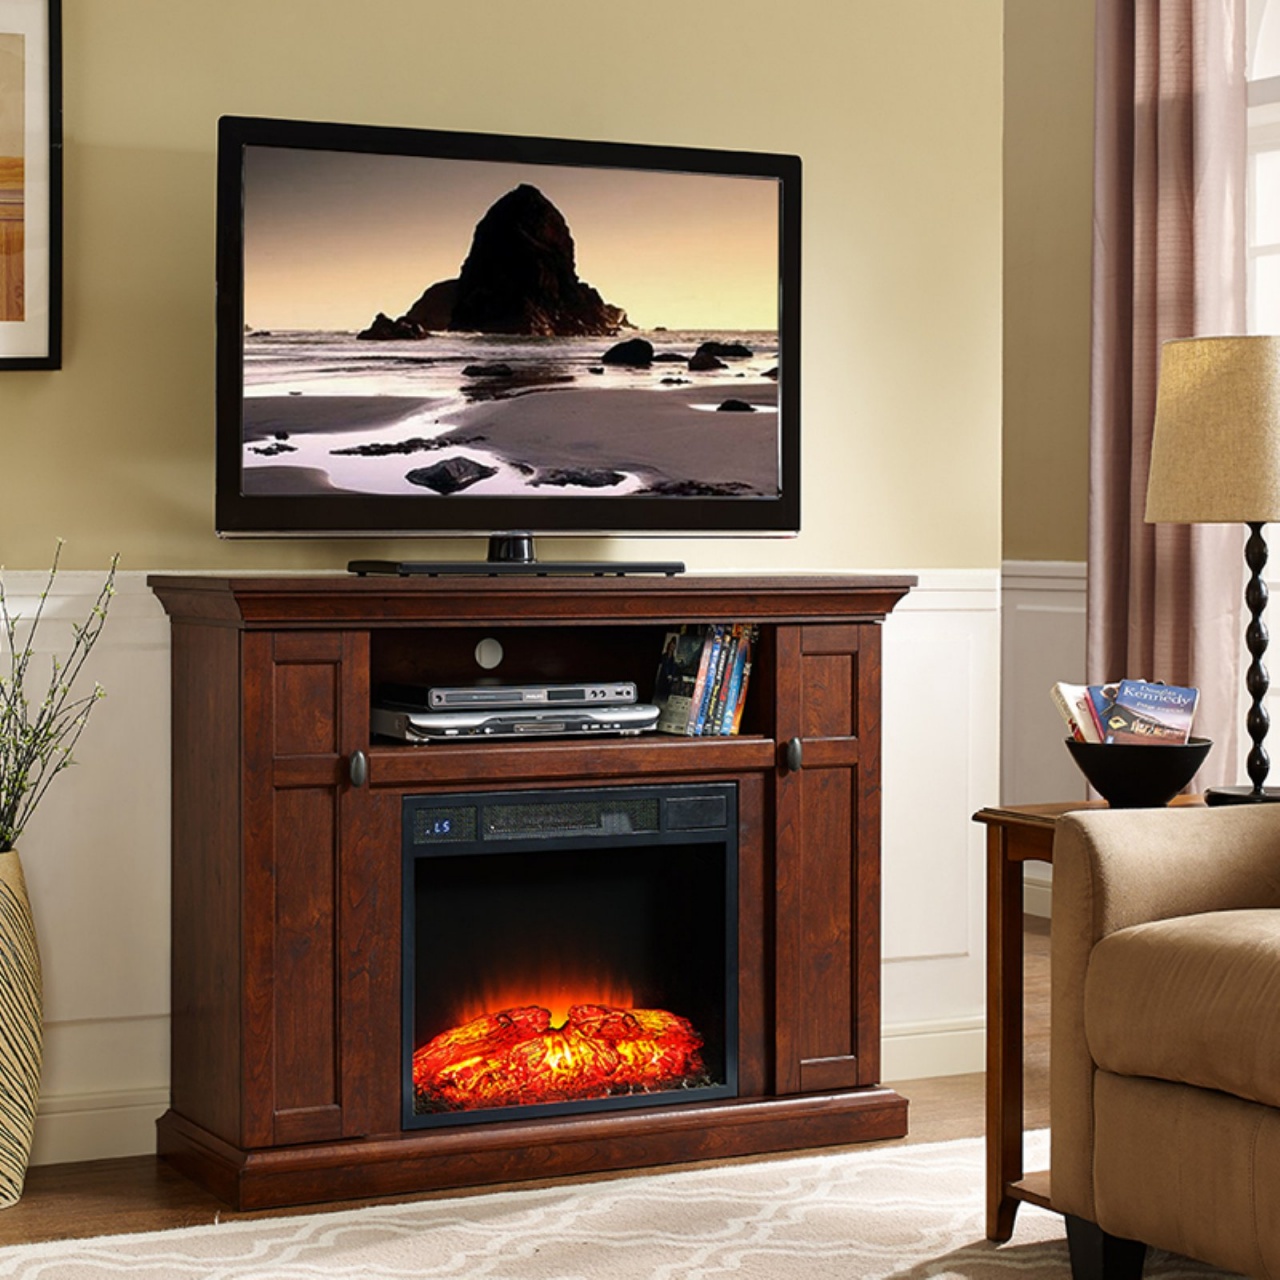 65 Inch Tv Over Fireplace Best Of Artificial Logs for Gas Fireplace – Fireplace Ideas